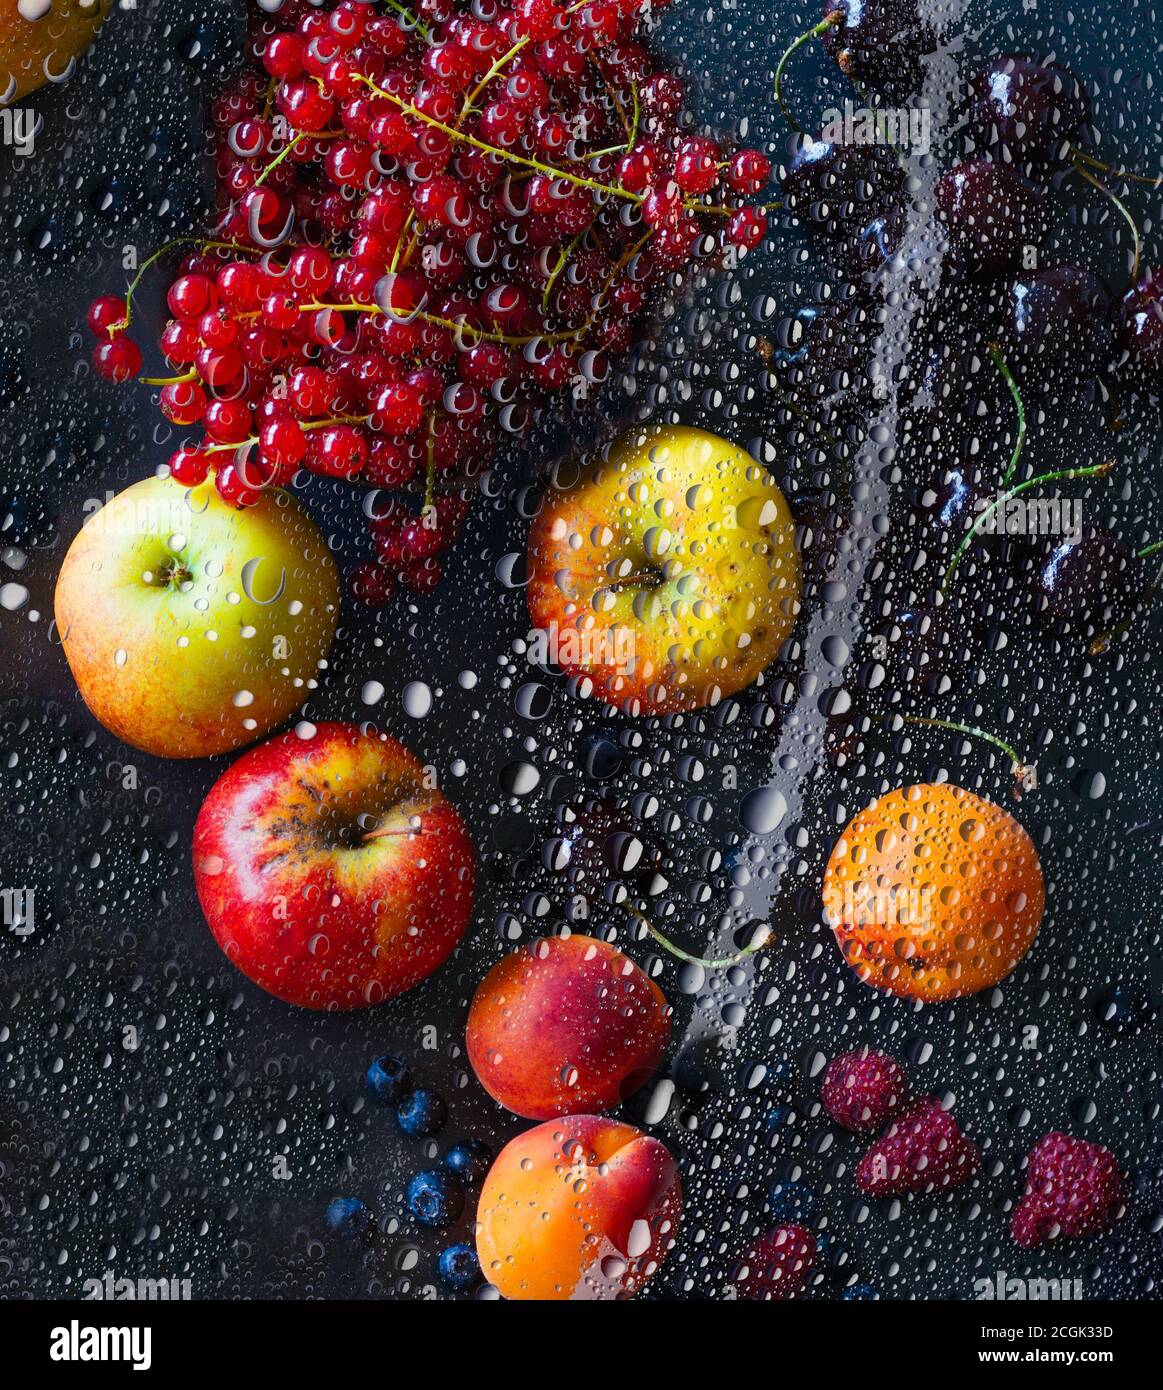 Fresh different fruits and berries, apple, apricot, currant, raspberry, chilled under dewed glass on black background Stock Photo